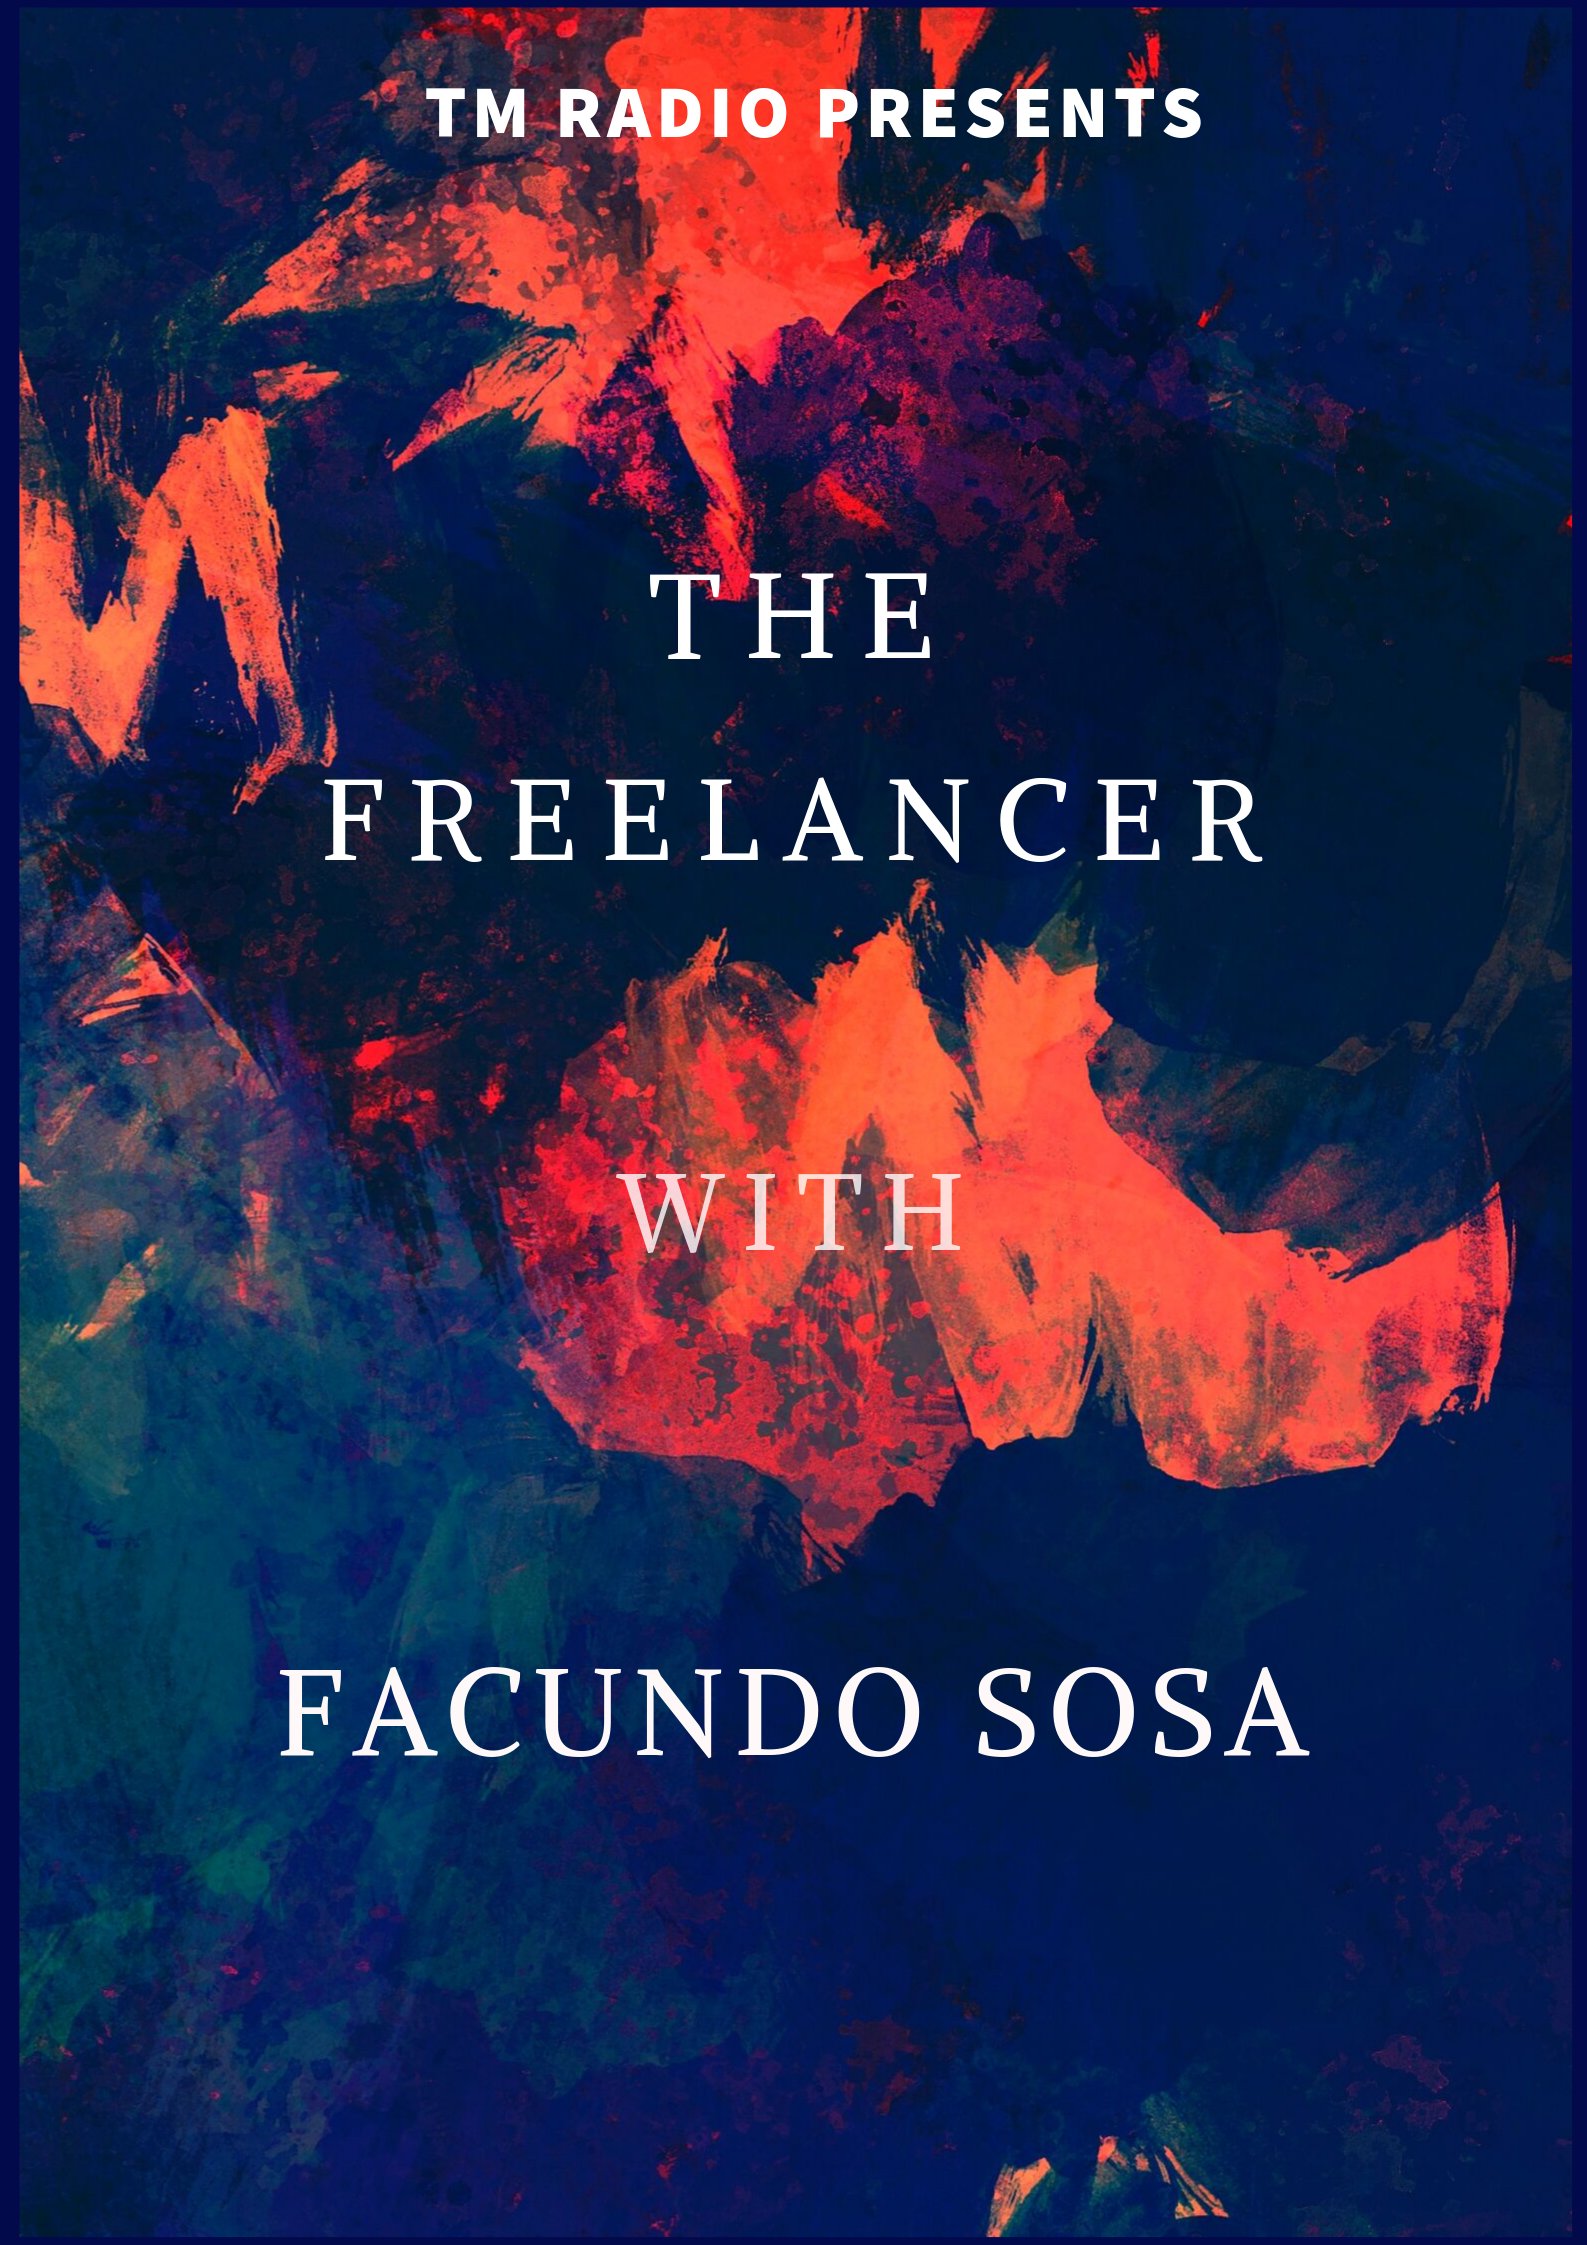 The Freelancer :: Episode 016 (aired on August 30th, 2020) banner logo